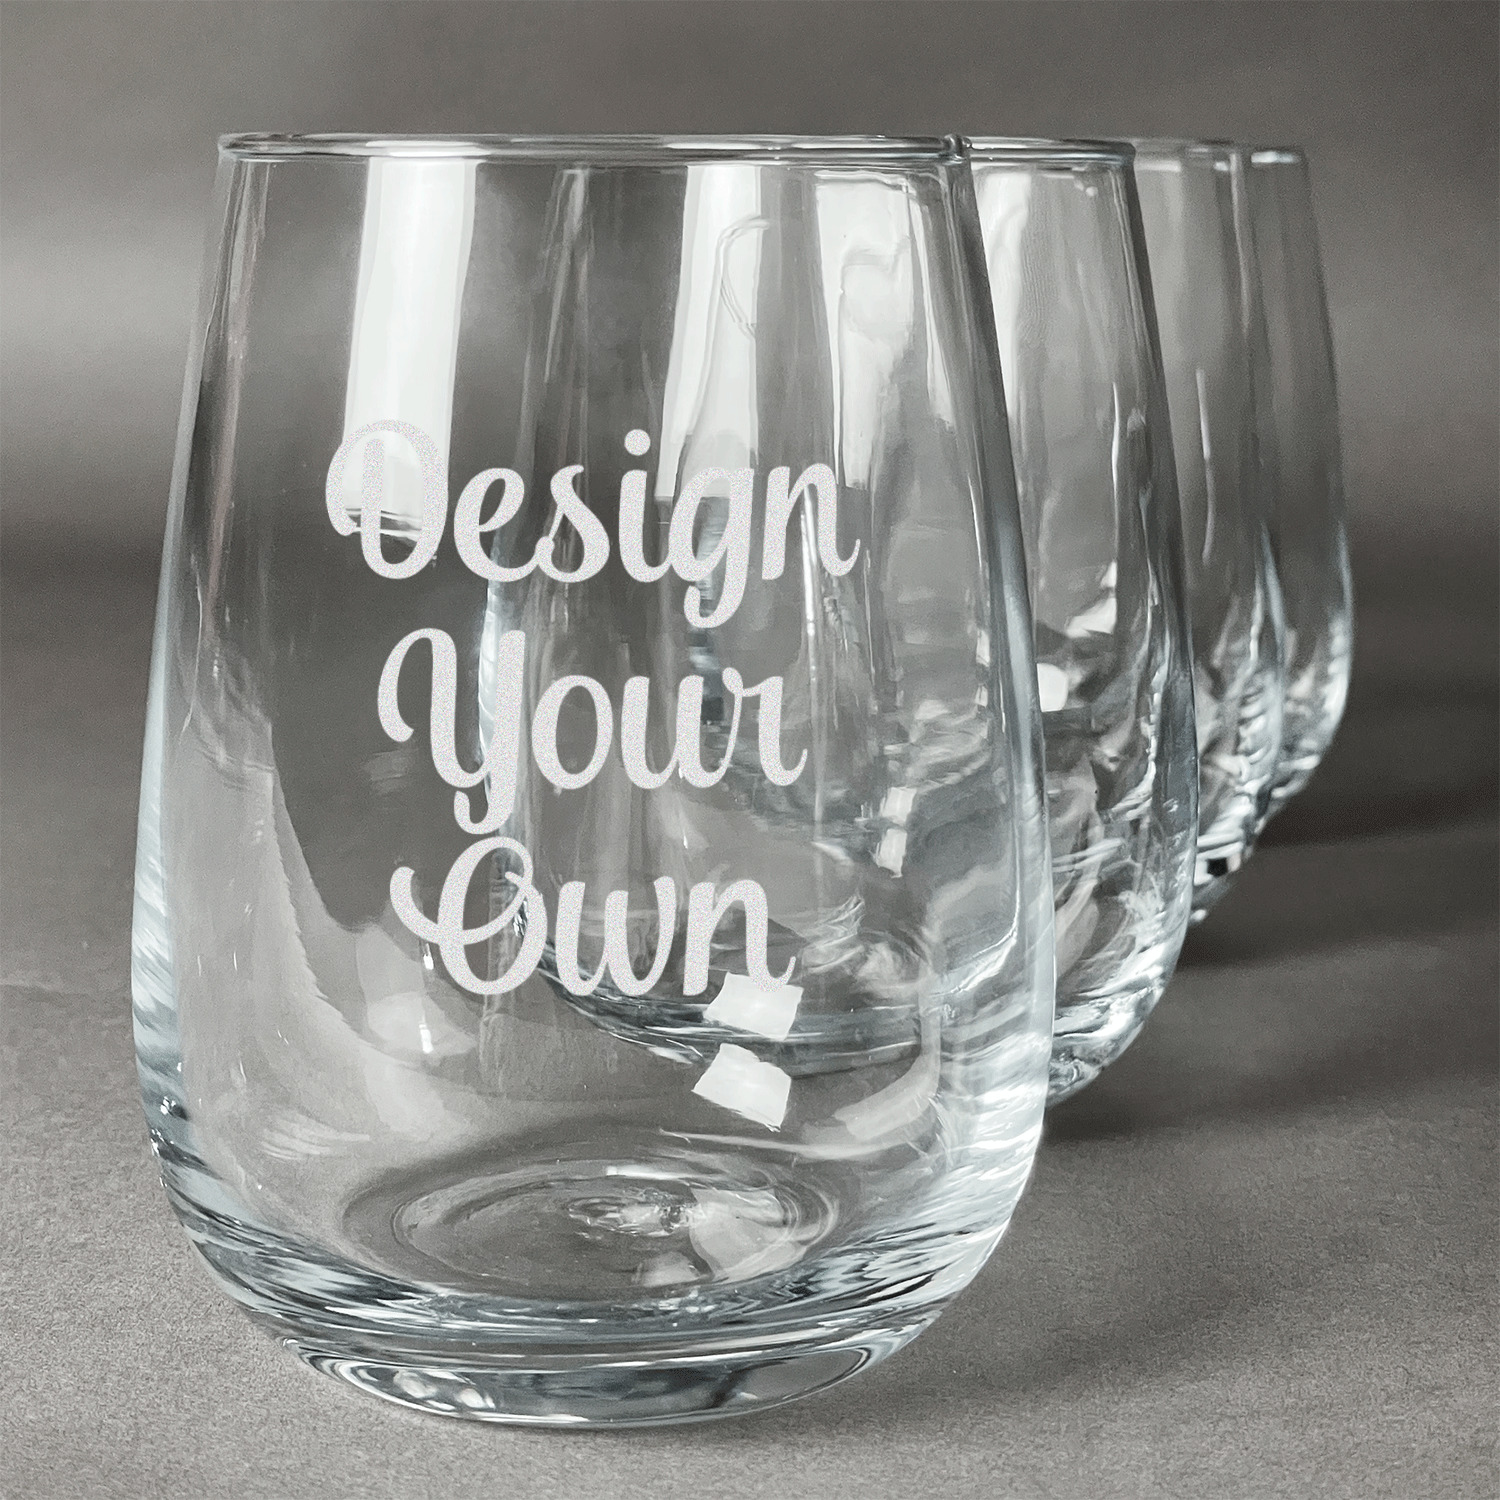 https://www.youcustomizeit.com/common/MAKE/965833/Design-Your-Own-Personalized-Stemless-Wine-Glasses-Set-of-4.jpg?lm=1682543281